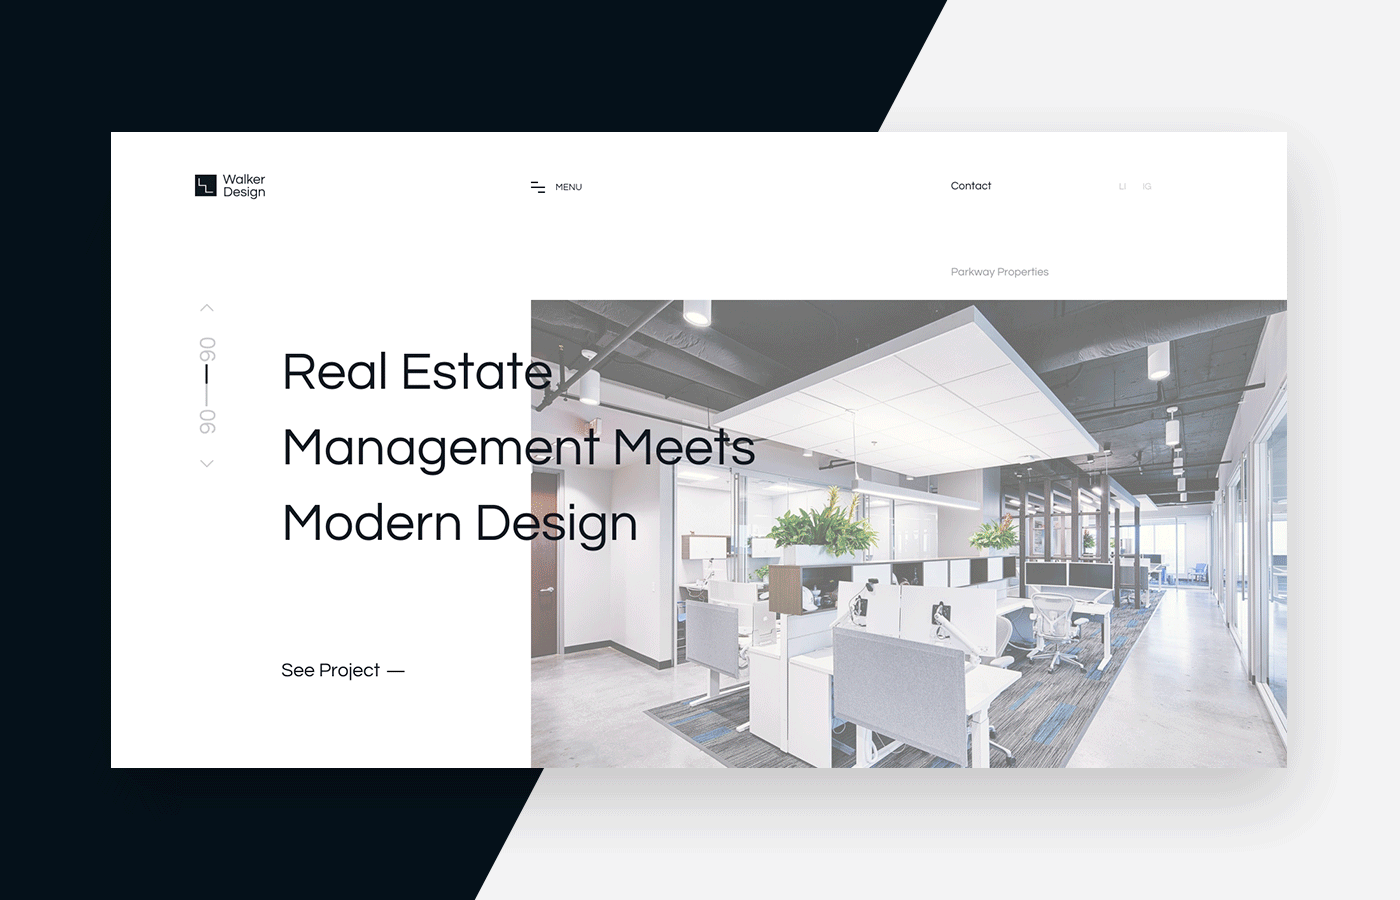 Website for an interior design and architecture firm